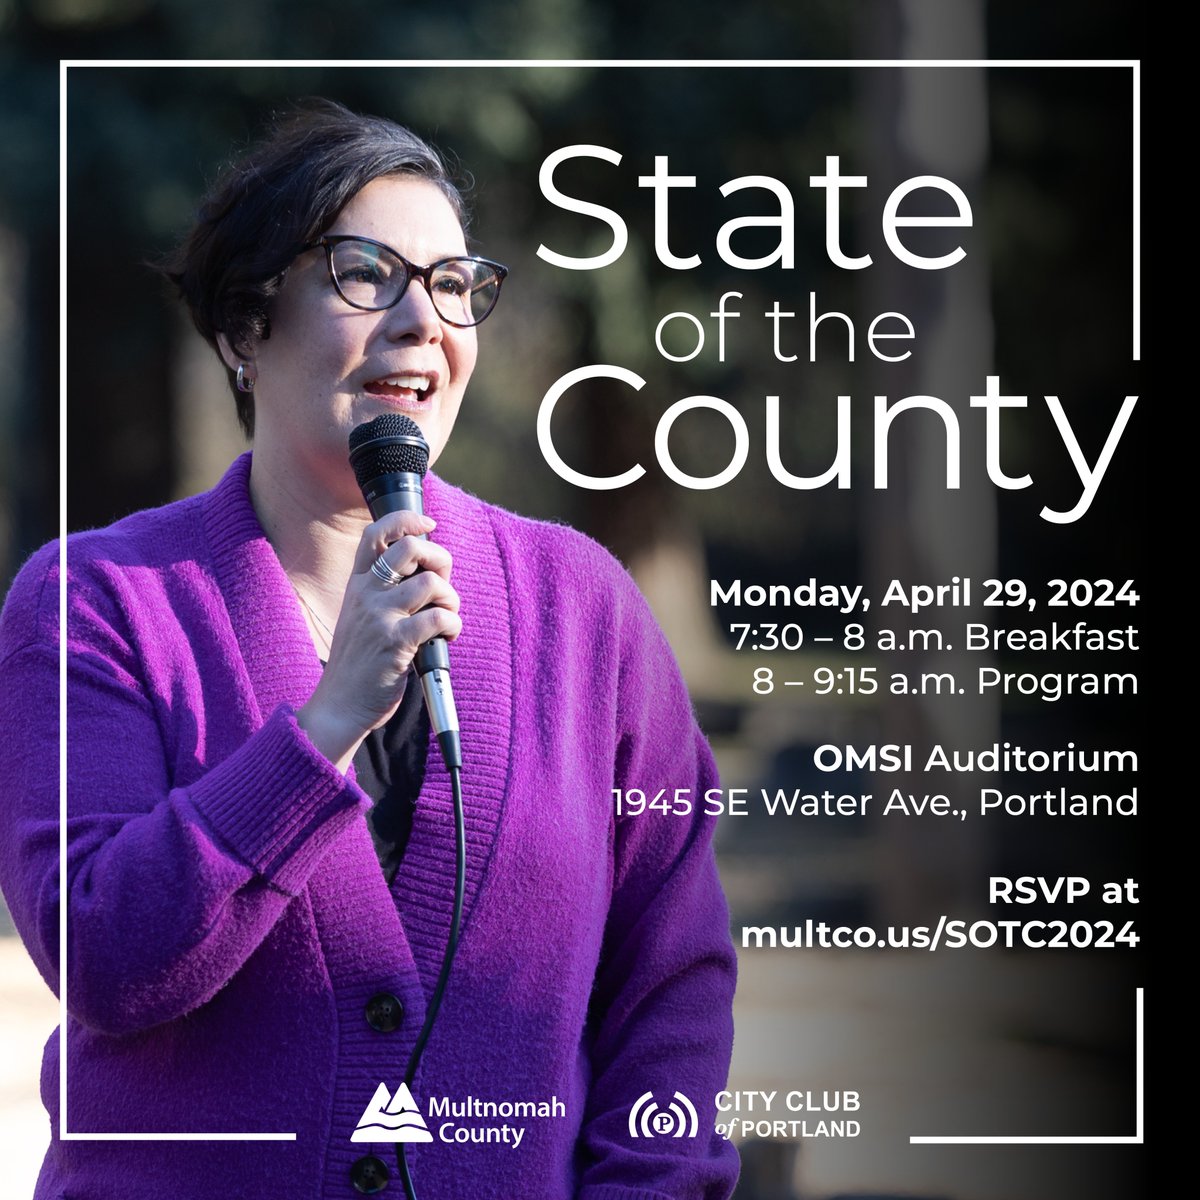 ICYMI: On Mon. Apr. 29 Chair @jvegapederson will deliver her State of the County address at the OMSI Auditorium. Following the Chair’s remarks, there will be a Q & A portion of the program. Doors open @ 7:30 a.m. RSVP at multco.us/SOTC2024